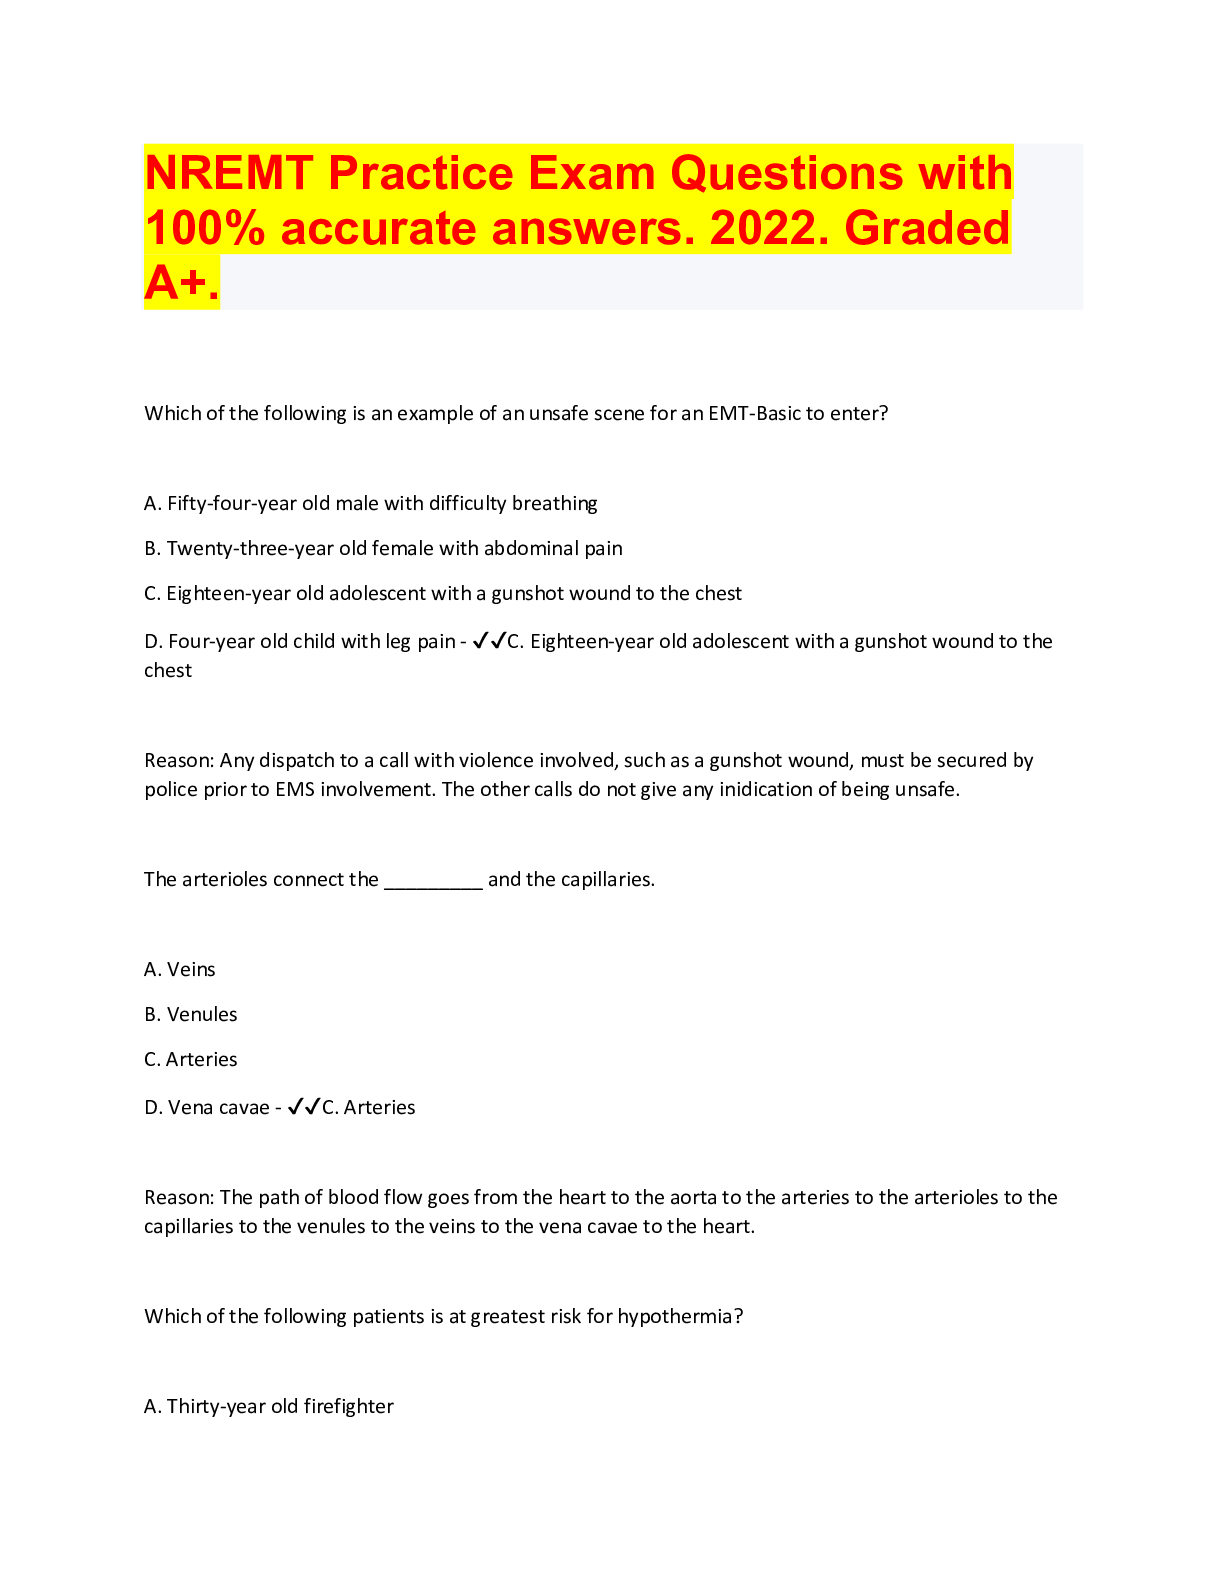 NREMT Practice Exam Questions with 100 accurate answers. 2022. Graded